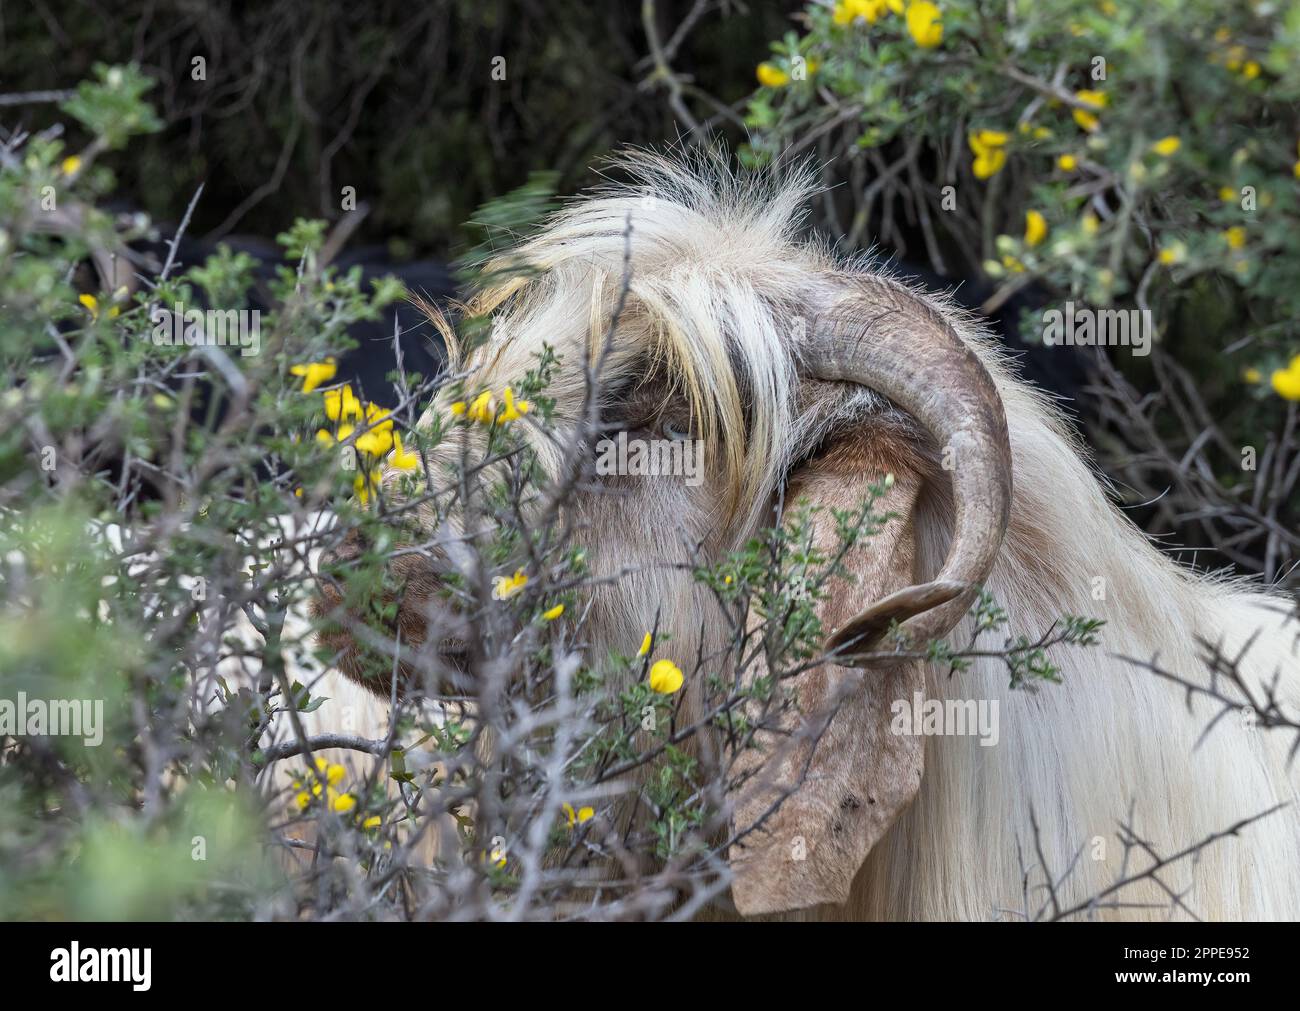 portrait of a hairy goat with curled horns and long ears Stock Photo